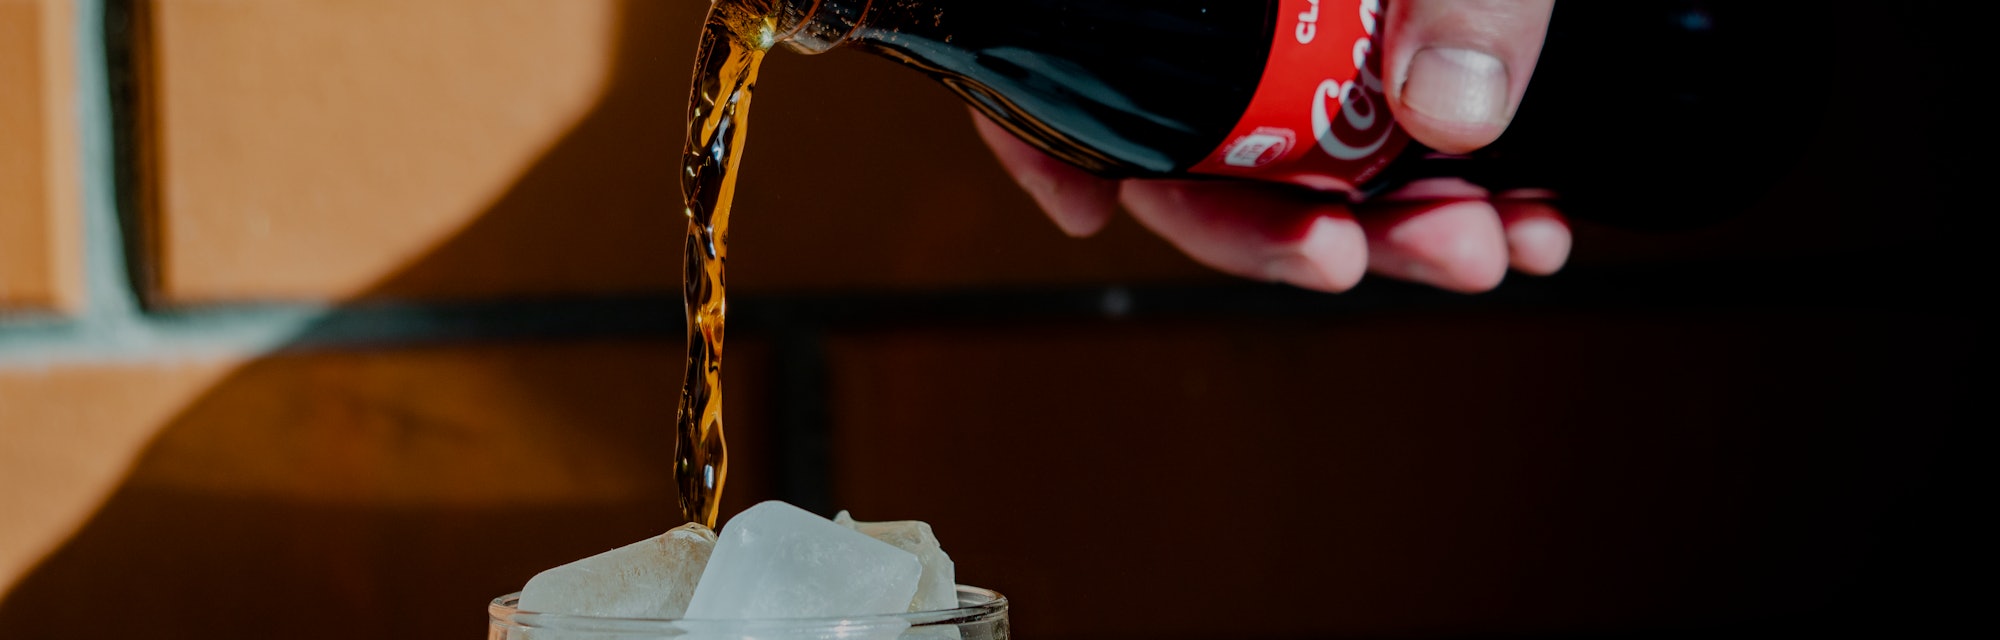 UKRAINE - 2021/04/29: In this photo illustration a Coca-Cola soft drink being poured into a glass wi...